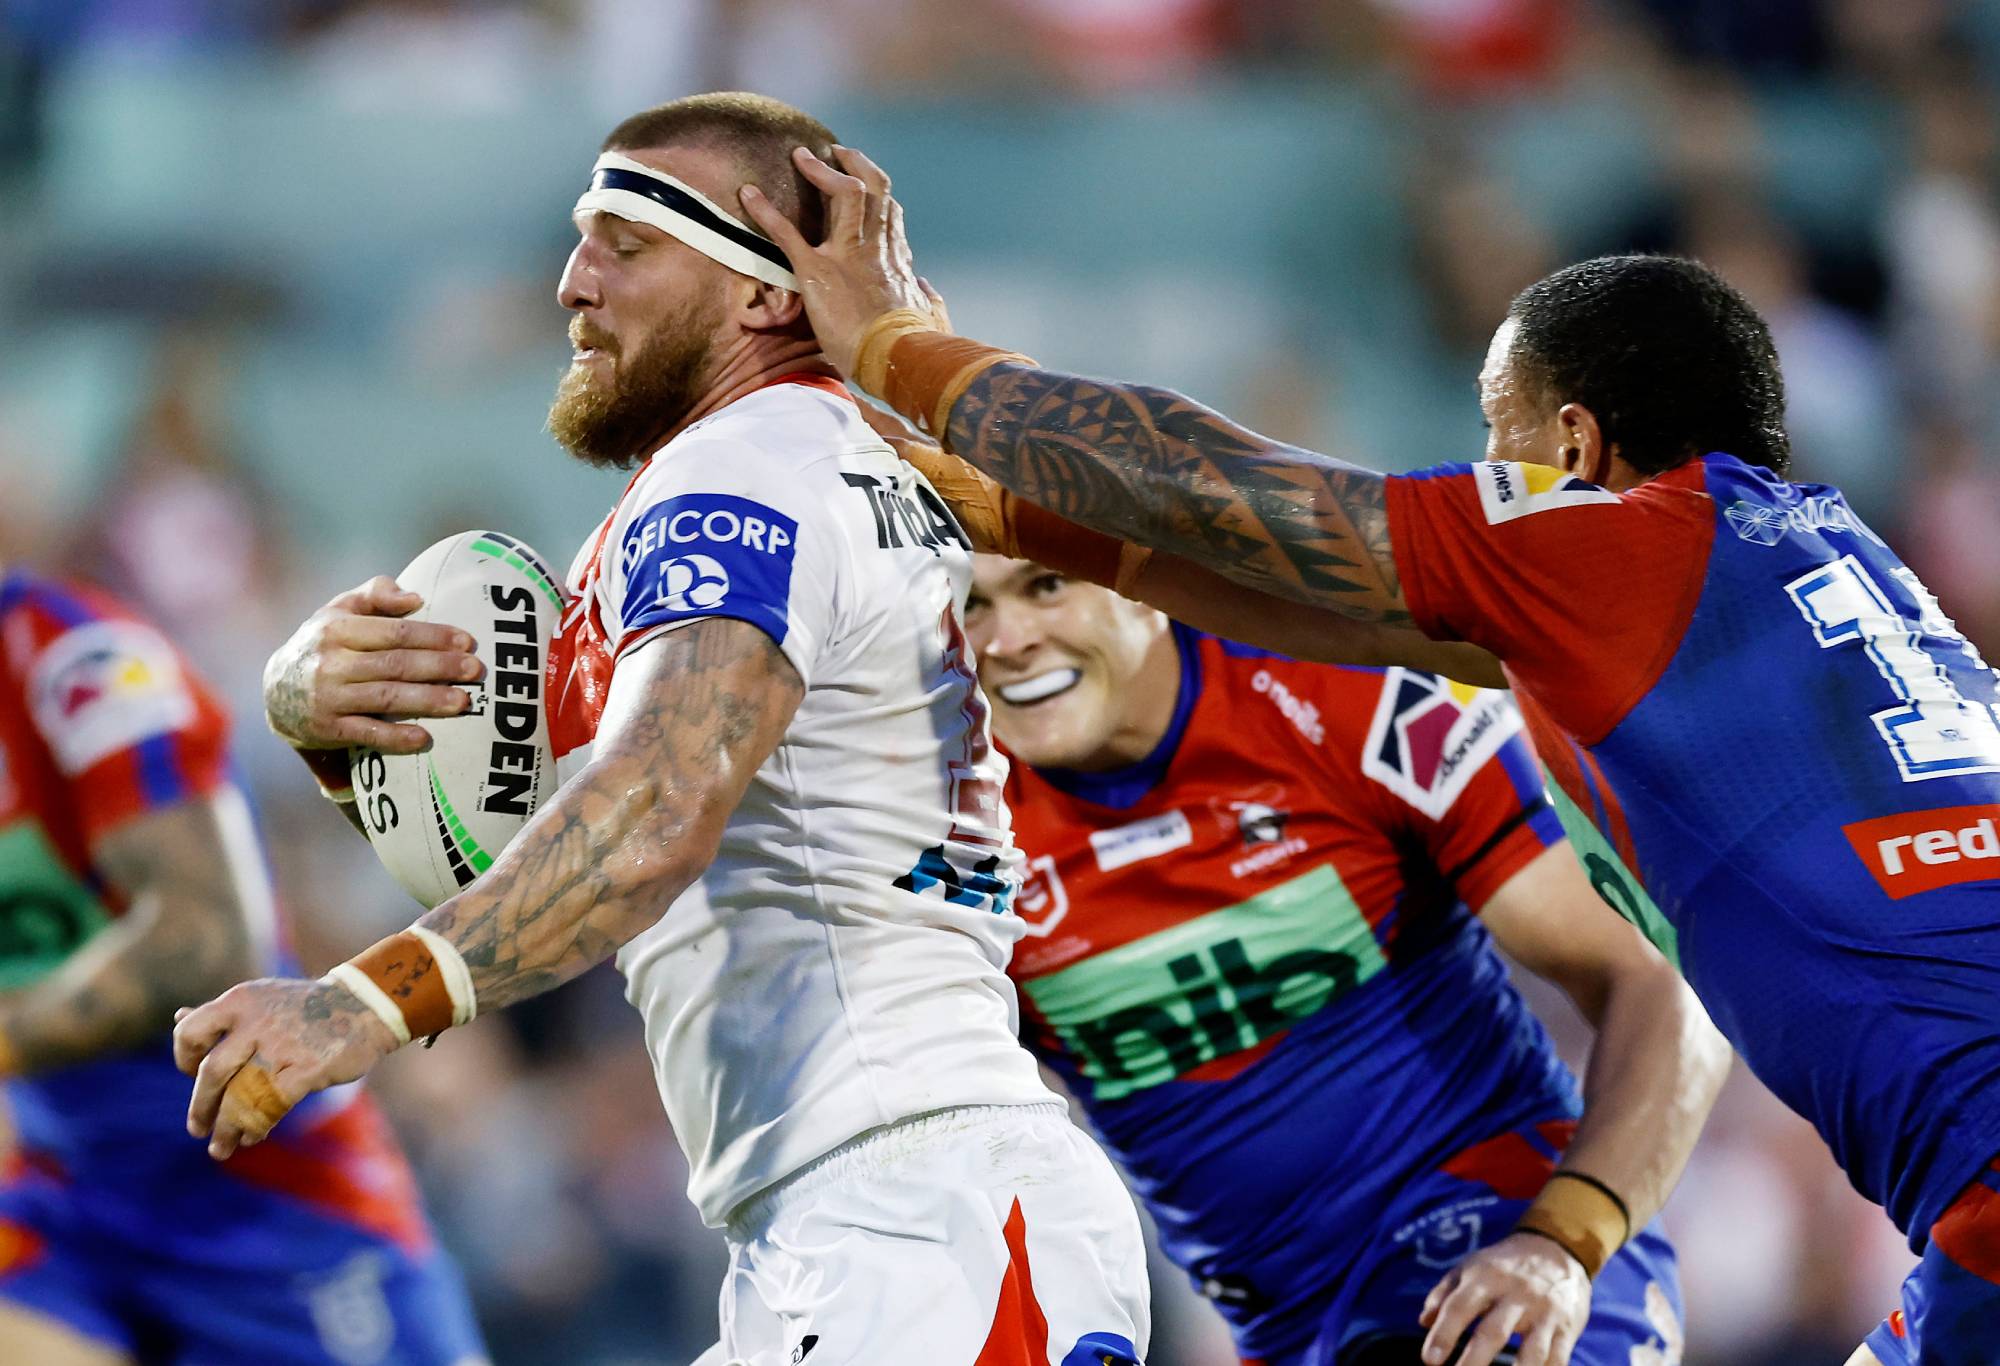 WOLLONGONG, AUSTRALIA - APRIL 17: Josh McGuire of the Dragons avoids the tackle of Tyson Frizell of the Knights during the round six NRL match between the St George Illawarra Dragons and the Newcastle Knights at WIN Stadium, on April 17, 2022, in Wollongong, Australia. (Photo by Mark Evans/Getty Images)